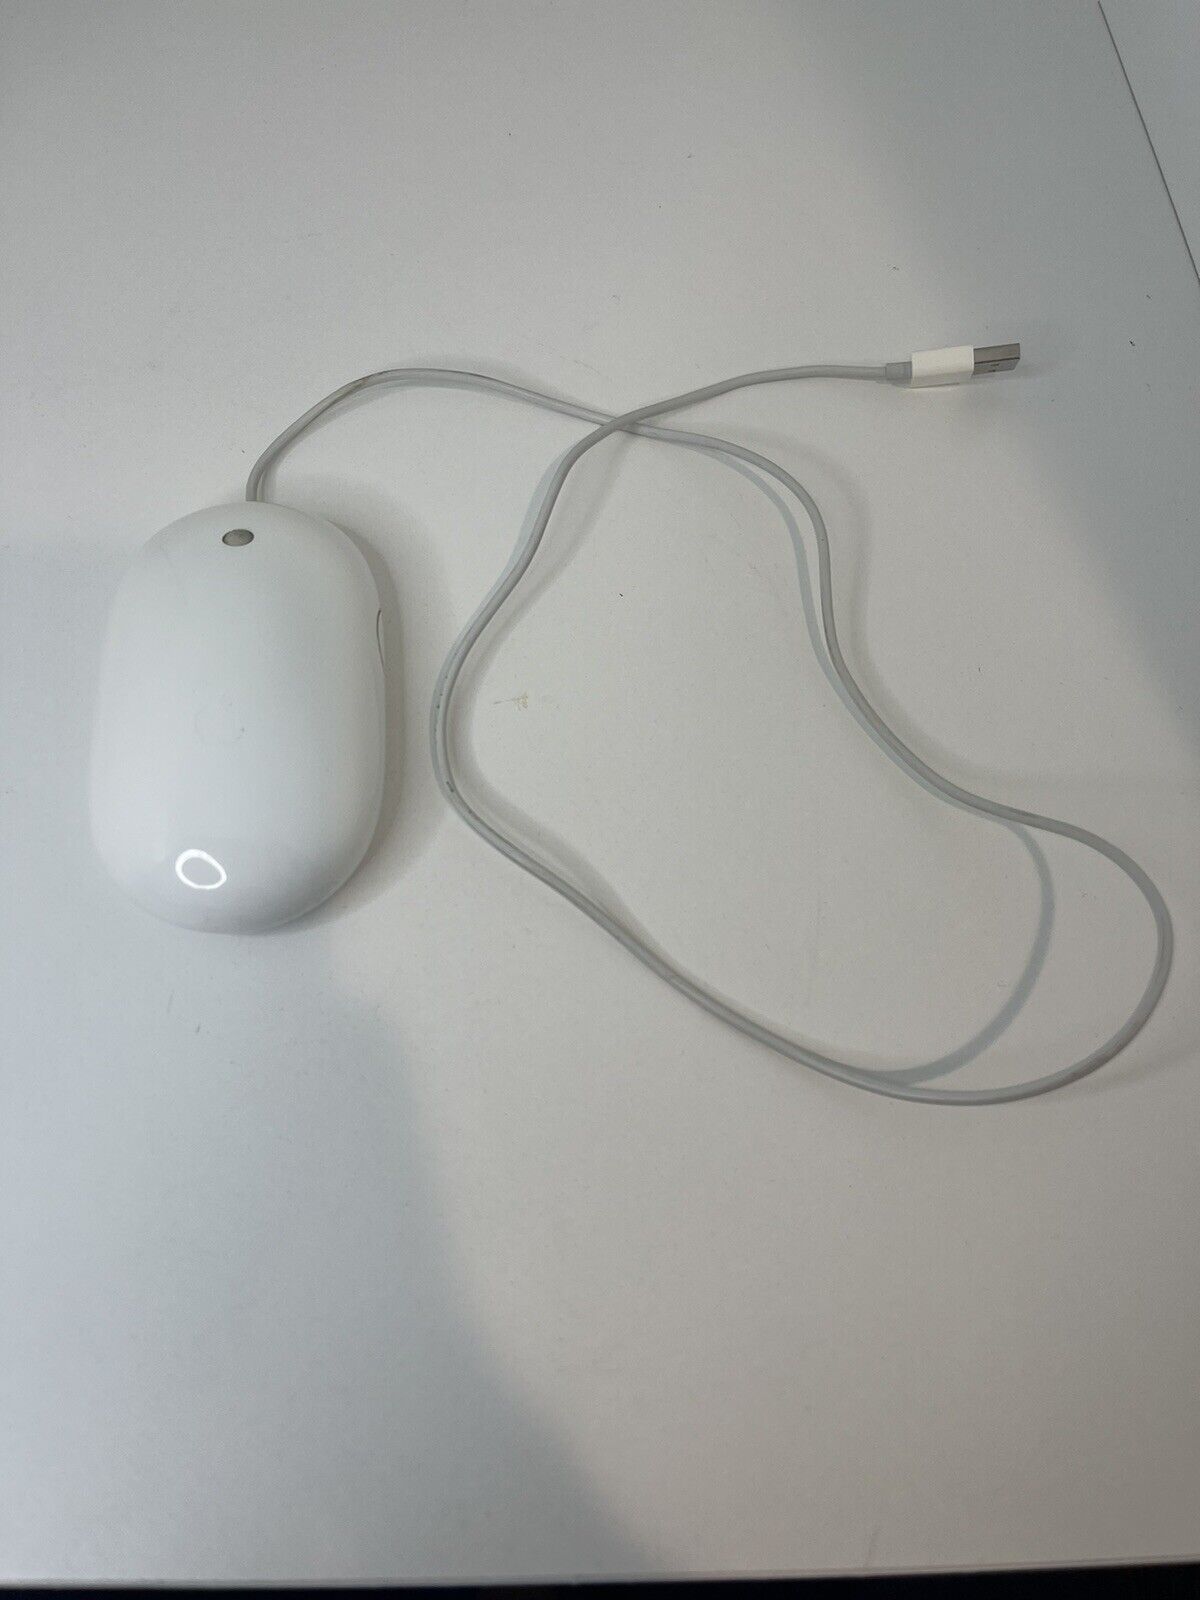 Genuine Apple Mighty Mouse Wired USB White Model No A1152 - Tested